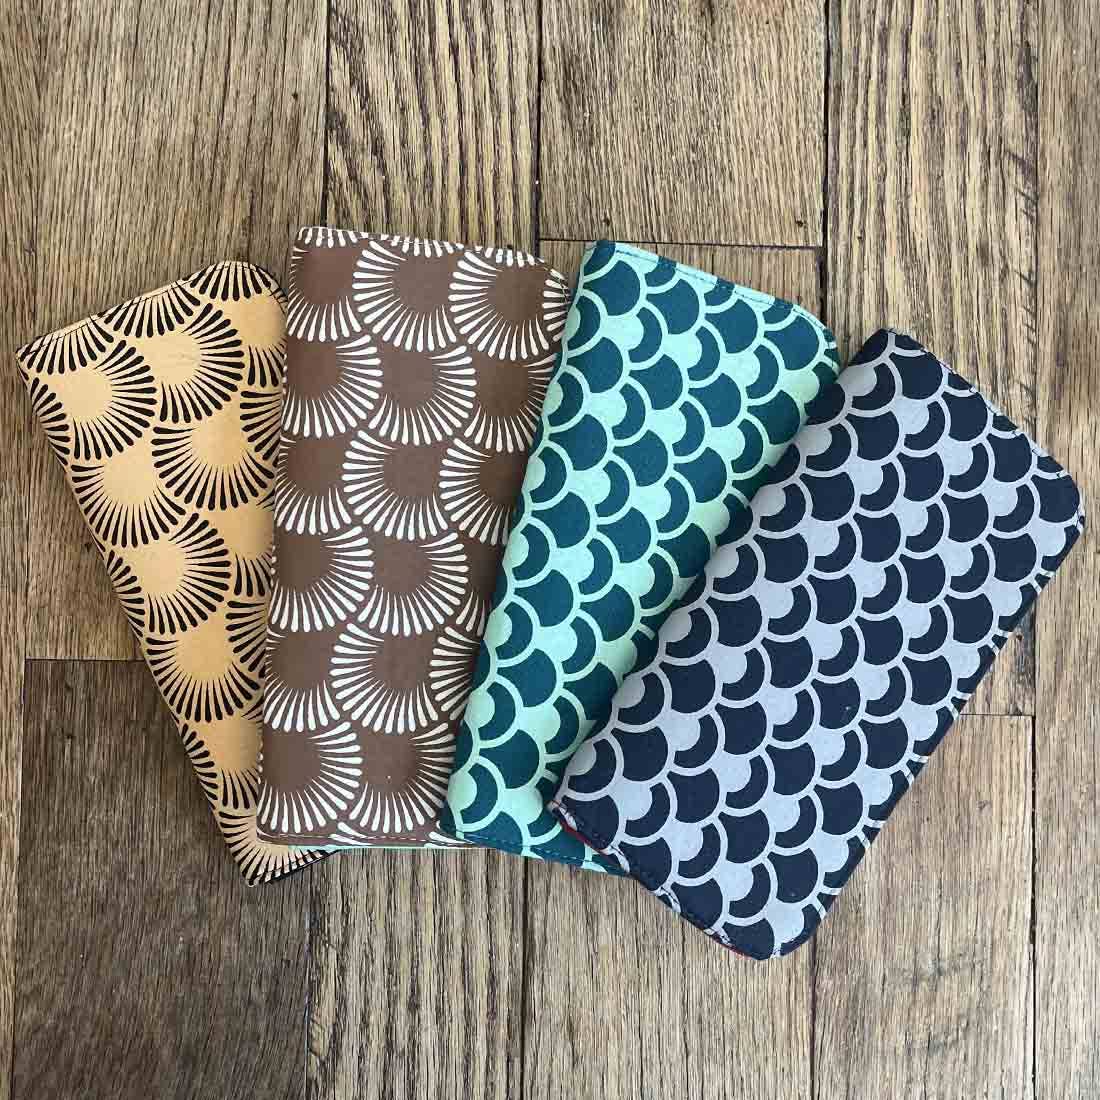 Cotton Canvas Long Wallet - New Fall Styles!: Chocolate